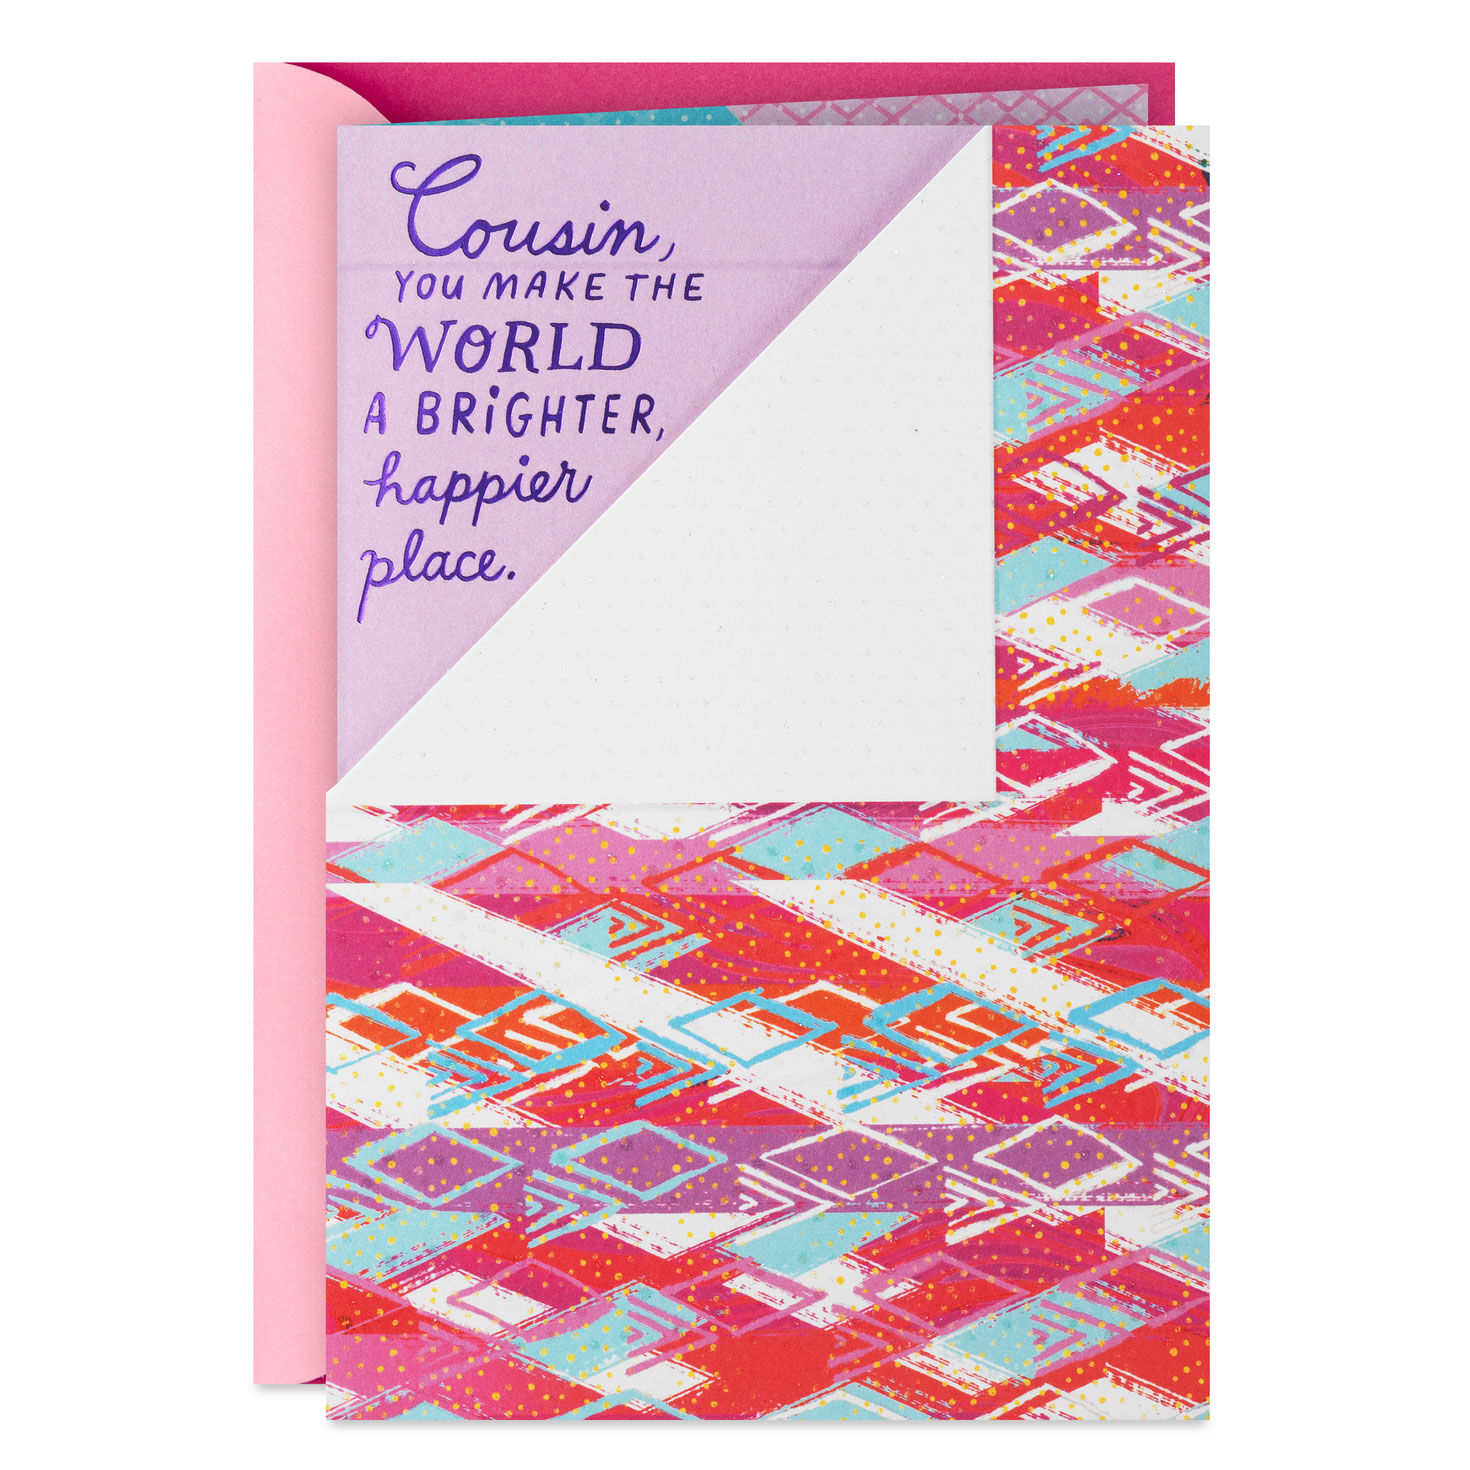 Brighter and Happier World Birthday Card for Cousin for only USD 4.59 | Hallmark